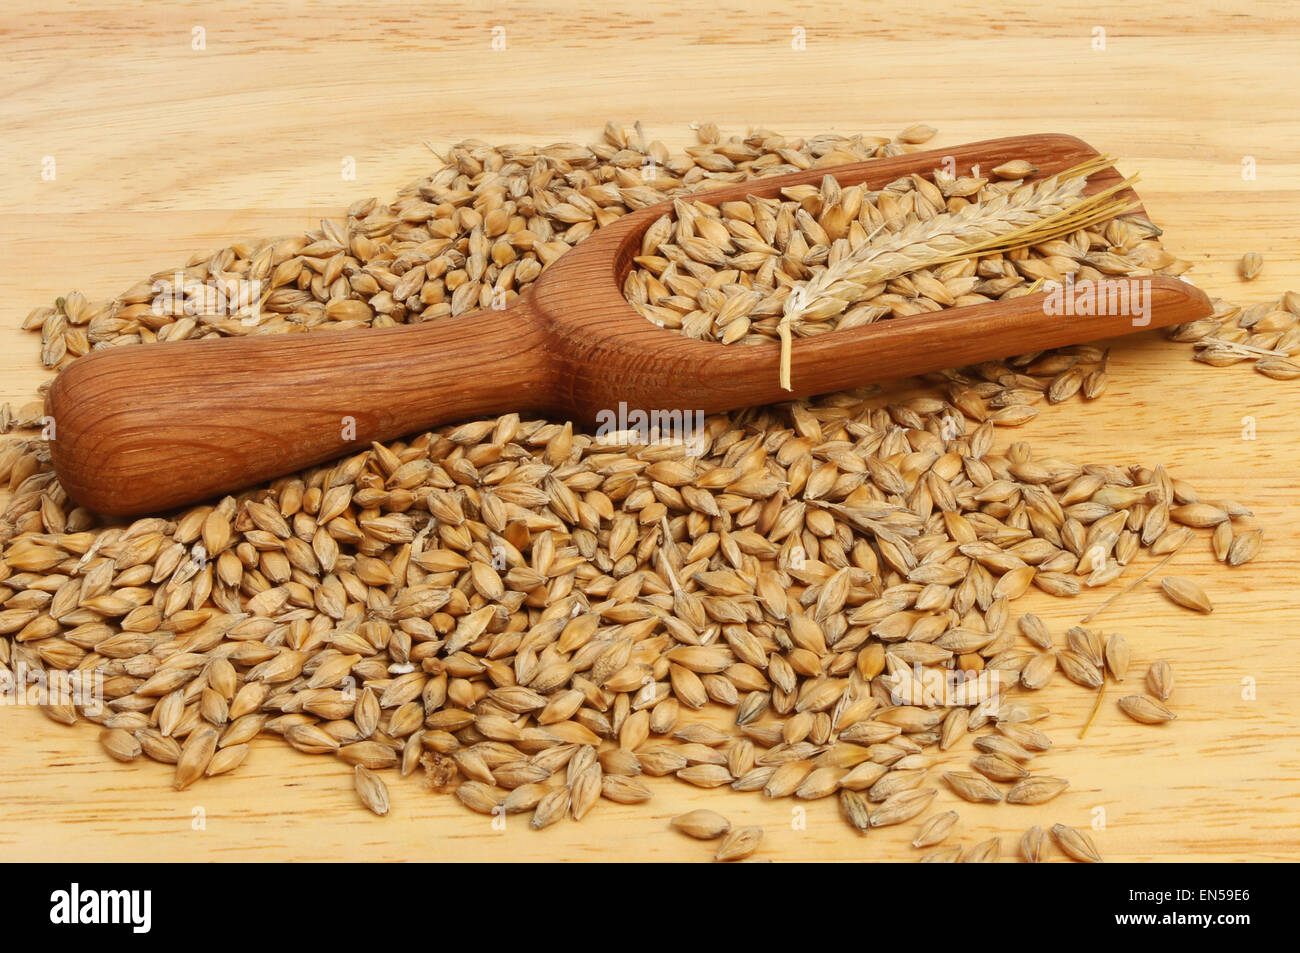 Barley in and around a wooden scoop on a wooden board Stock Photo